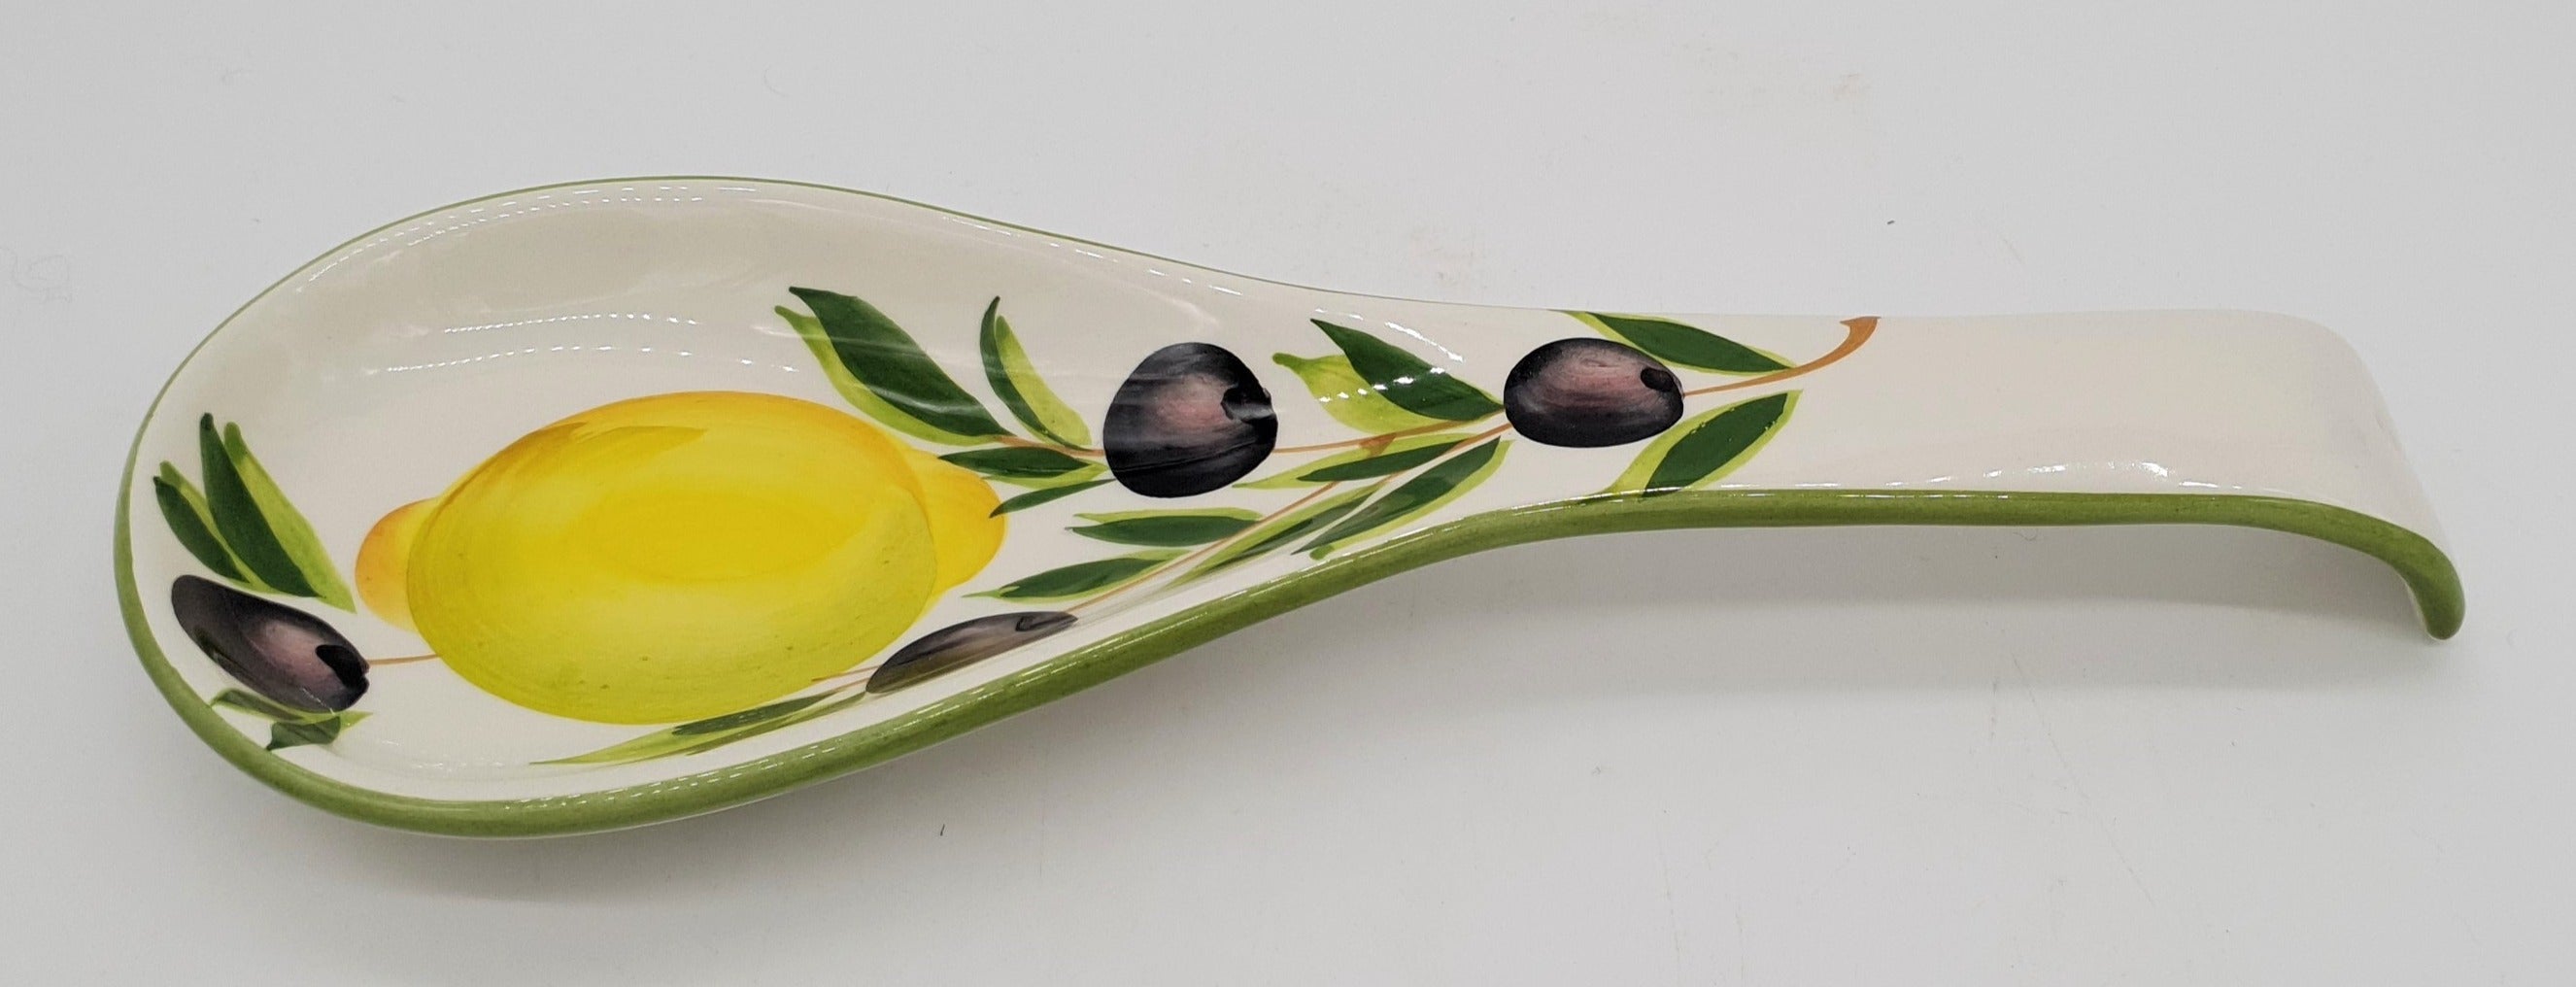 Ladle or spoon holder with lemons and olives decoration